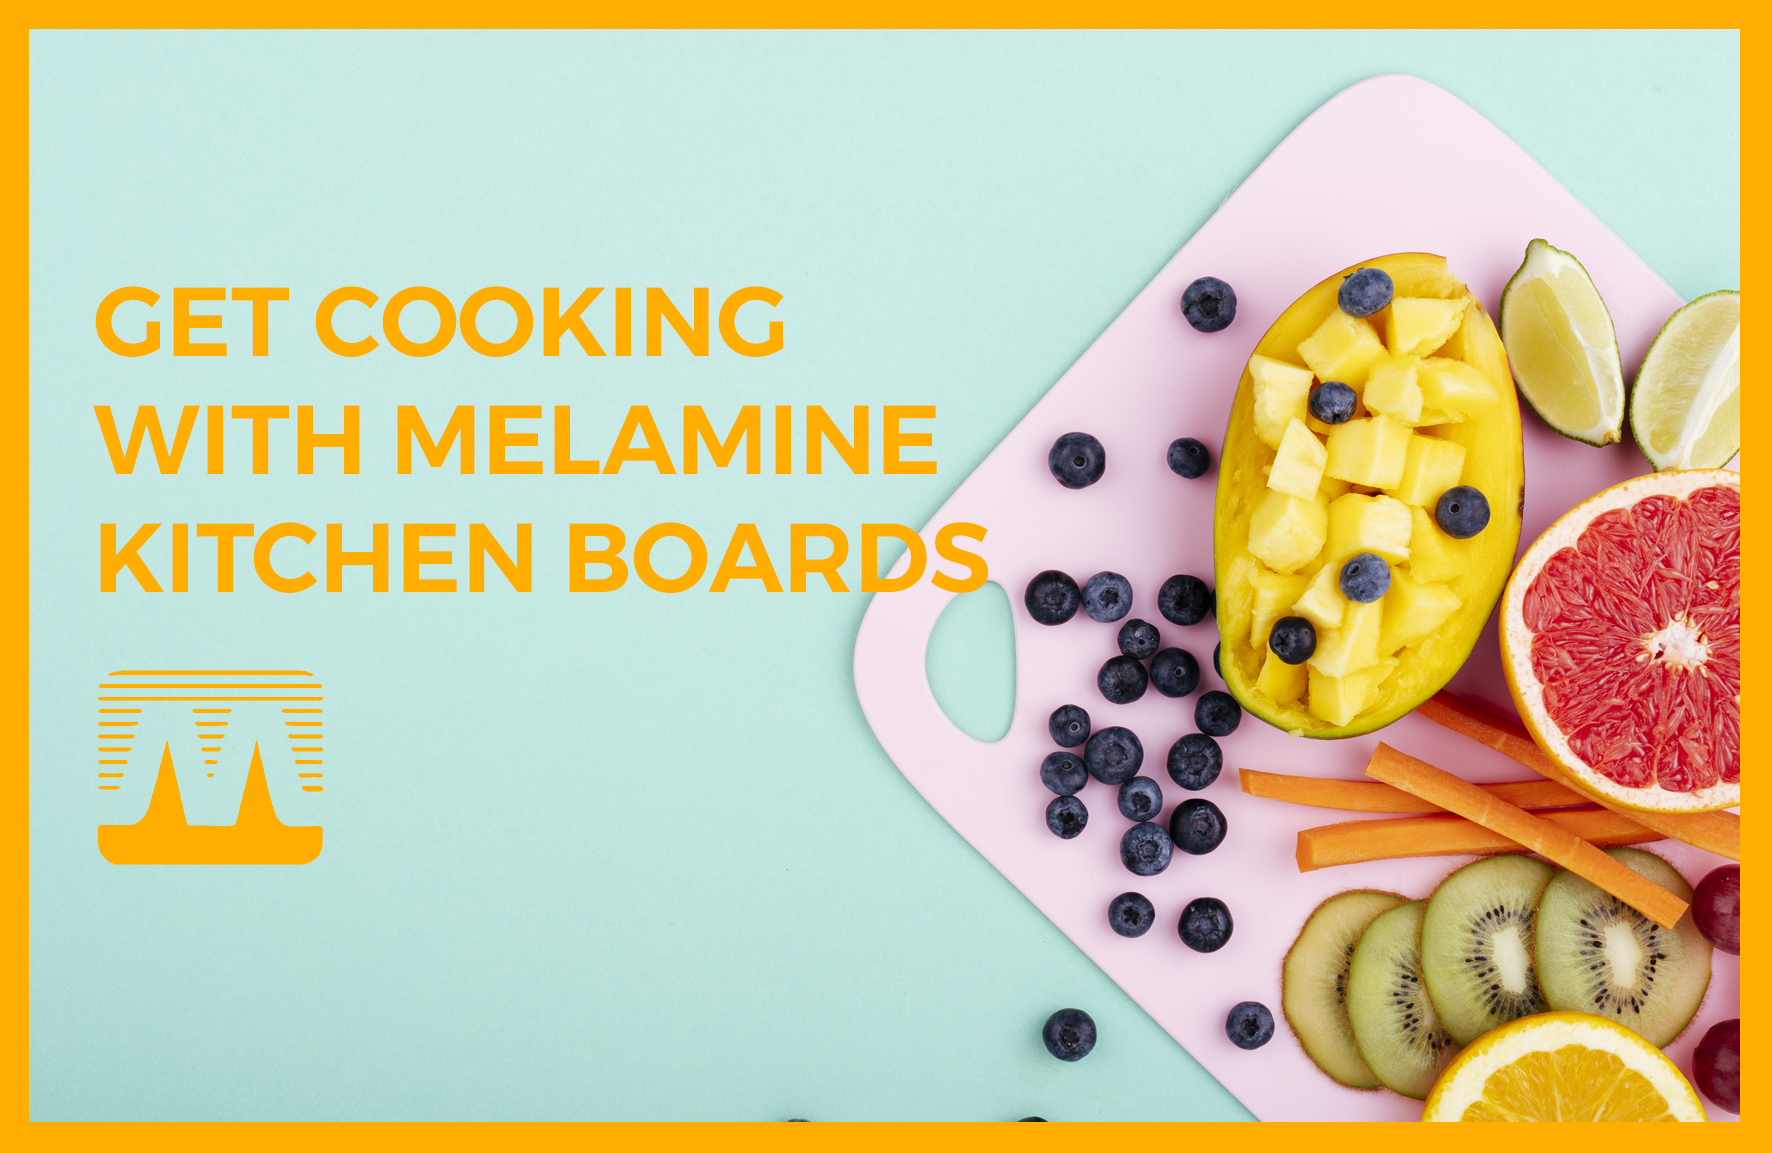 Title image showing a selection of chopped fruit on a pink kitchen board.